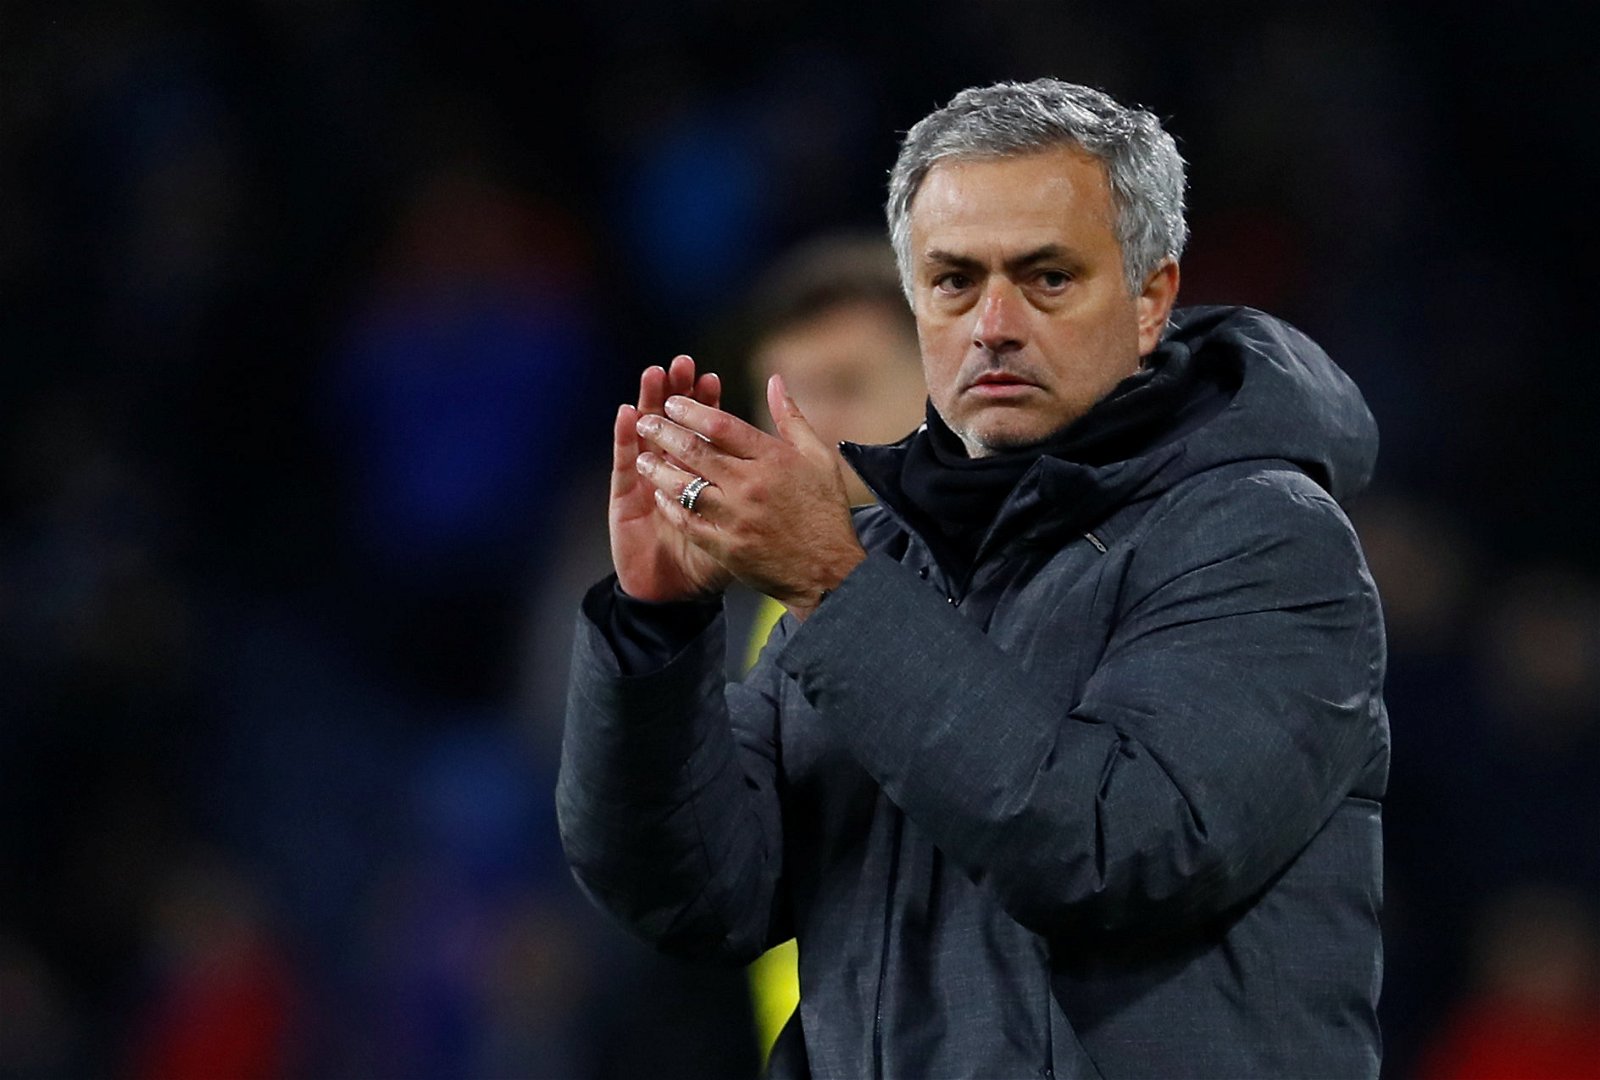 United will sign a midfielder, says Mourinho 1